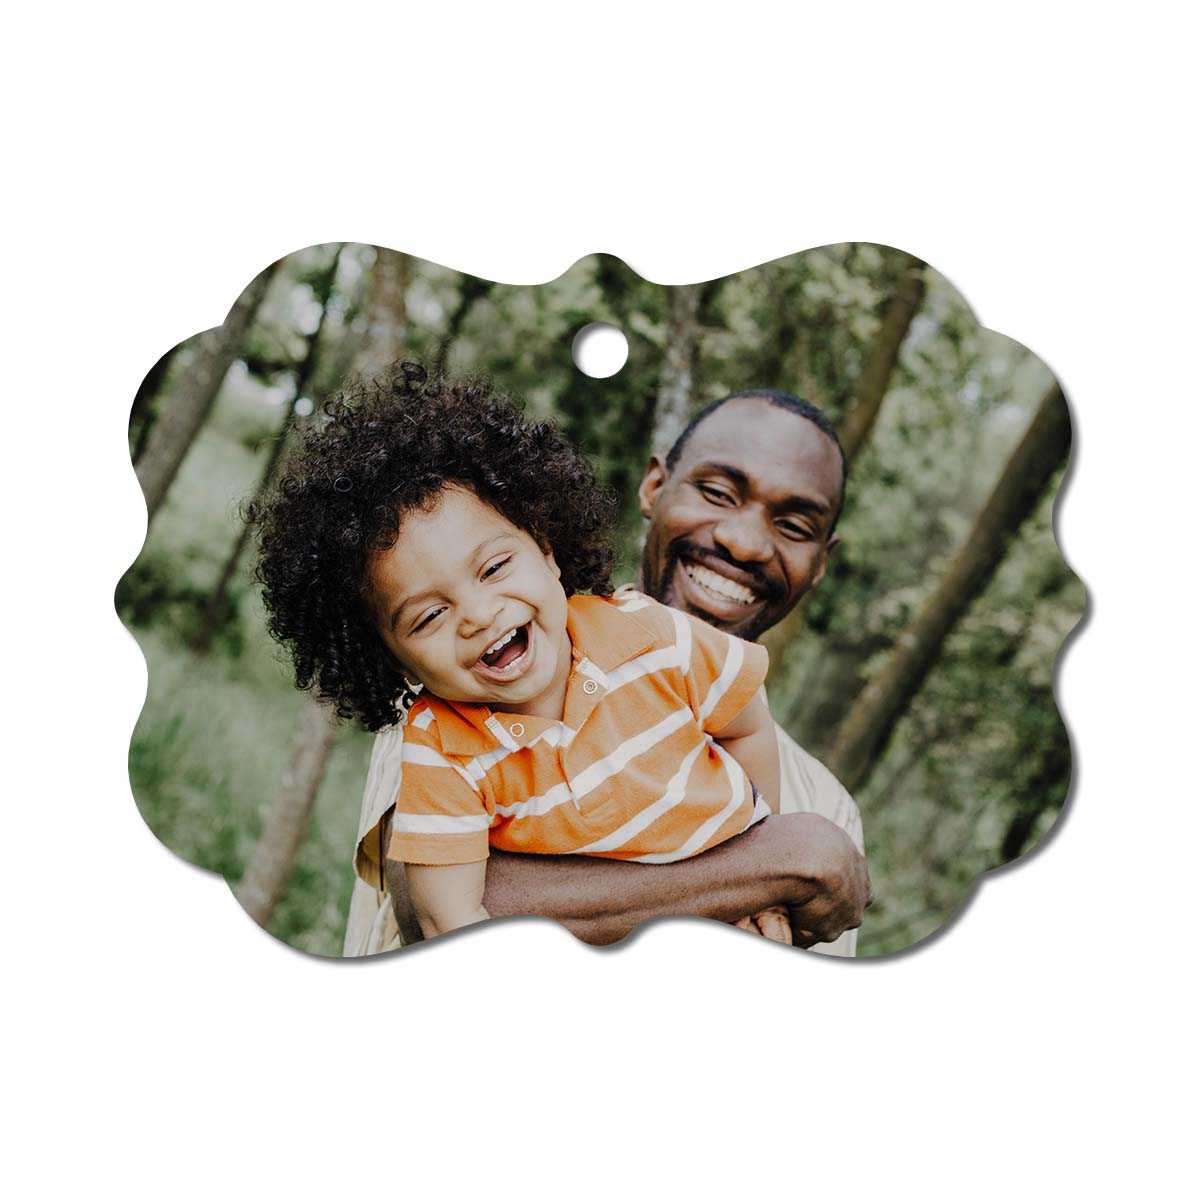 Metal ornament with an image of a father and his child